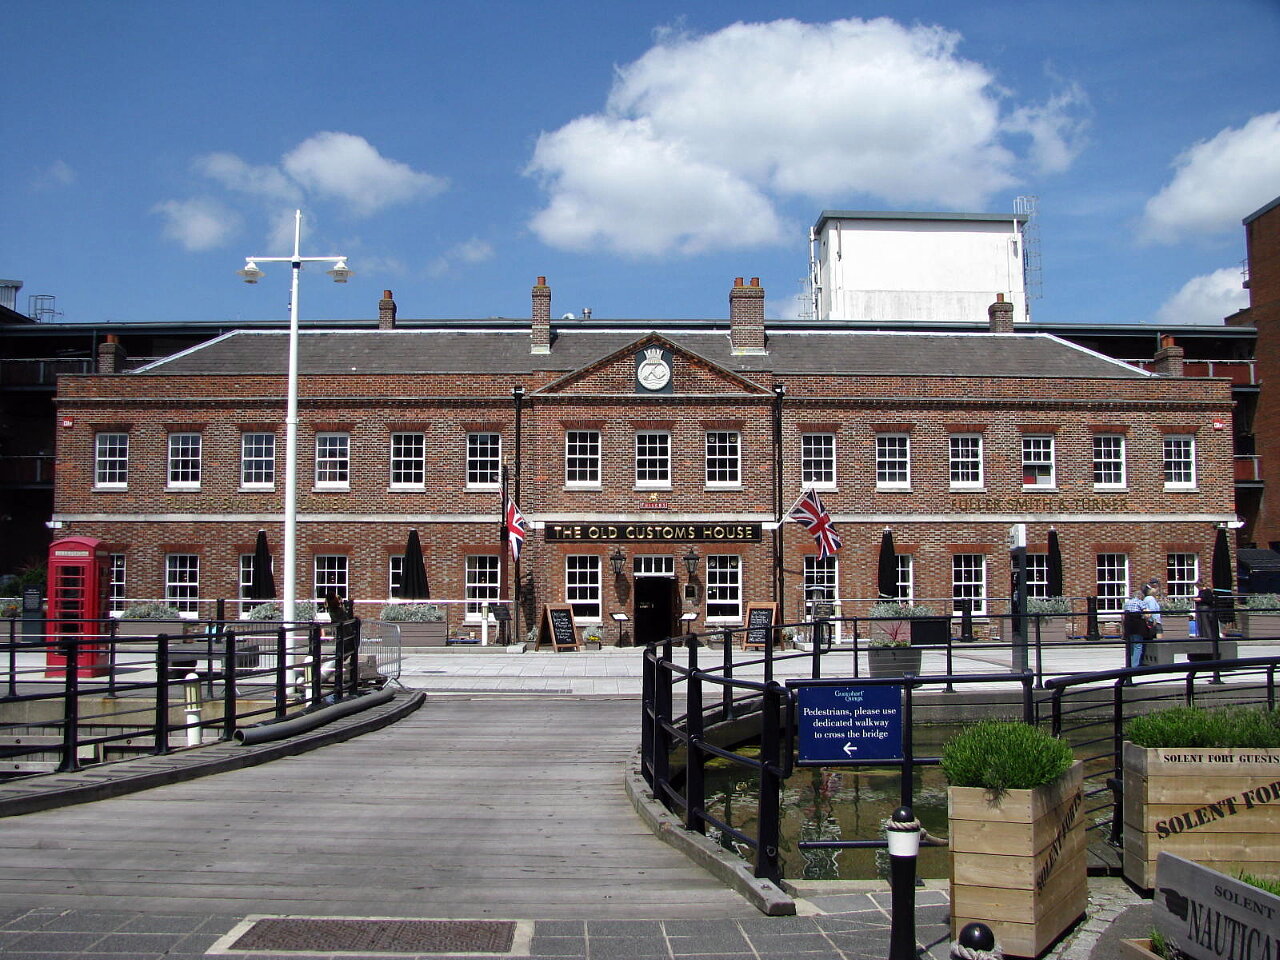 The Administration Building/Captain's offices (now the Old Customs House pub) at Gunwharf Quays (formerly HMS VERNON)